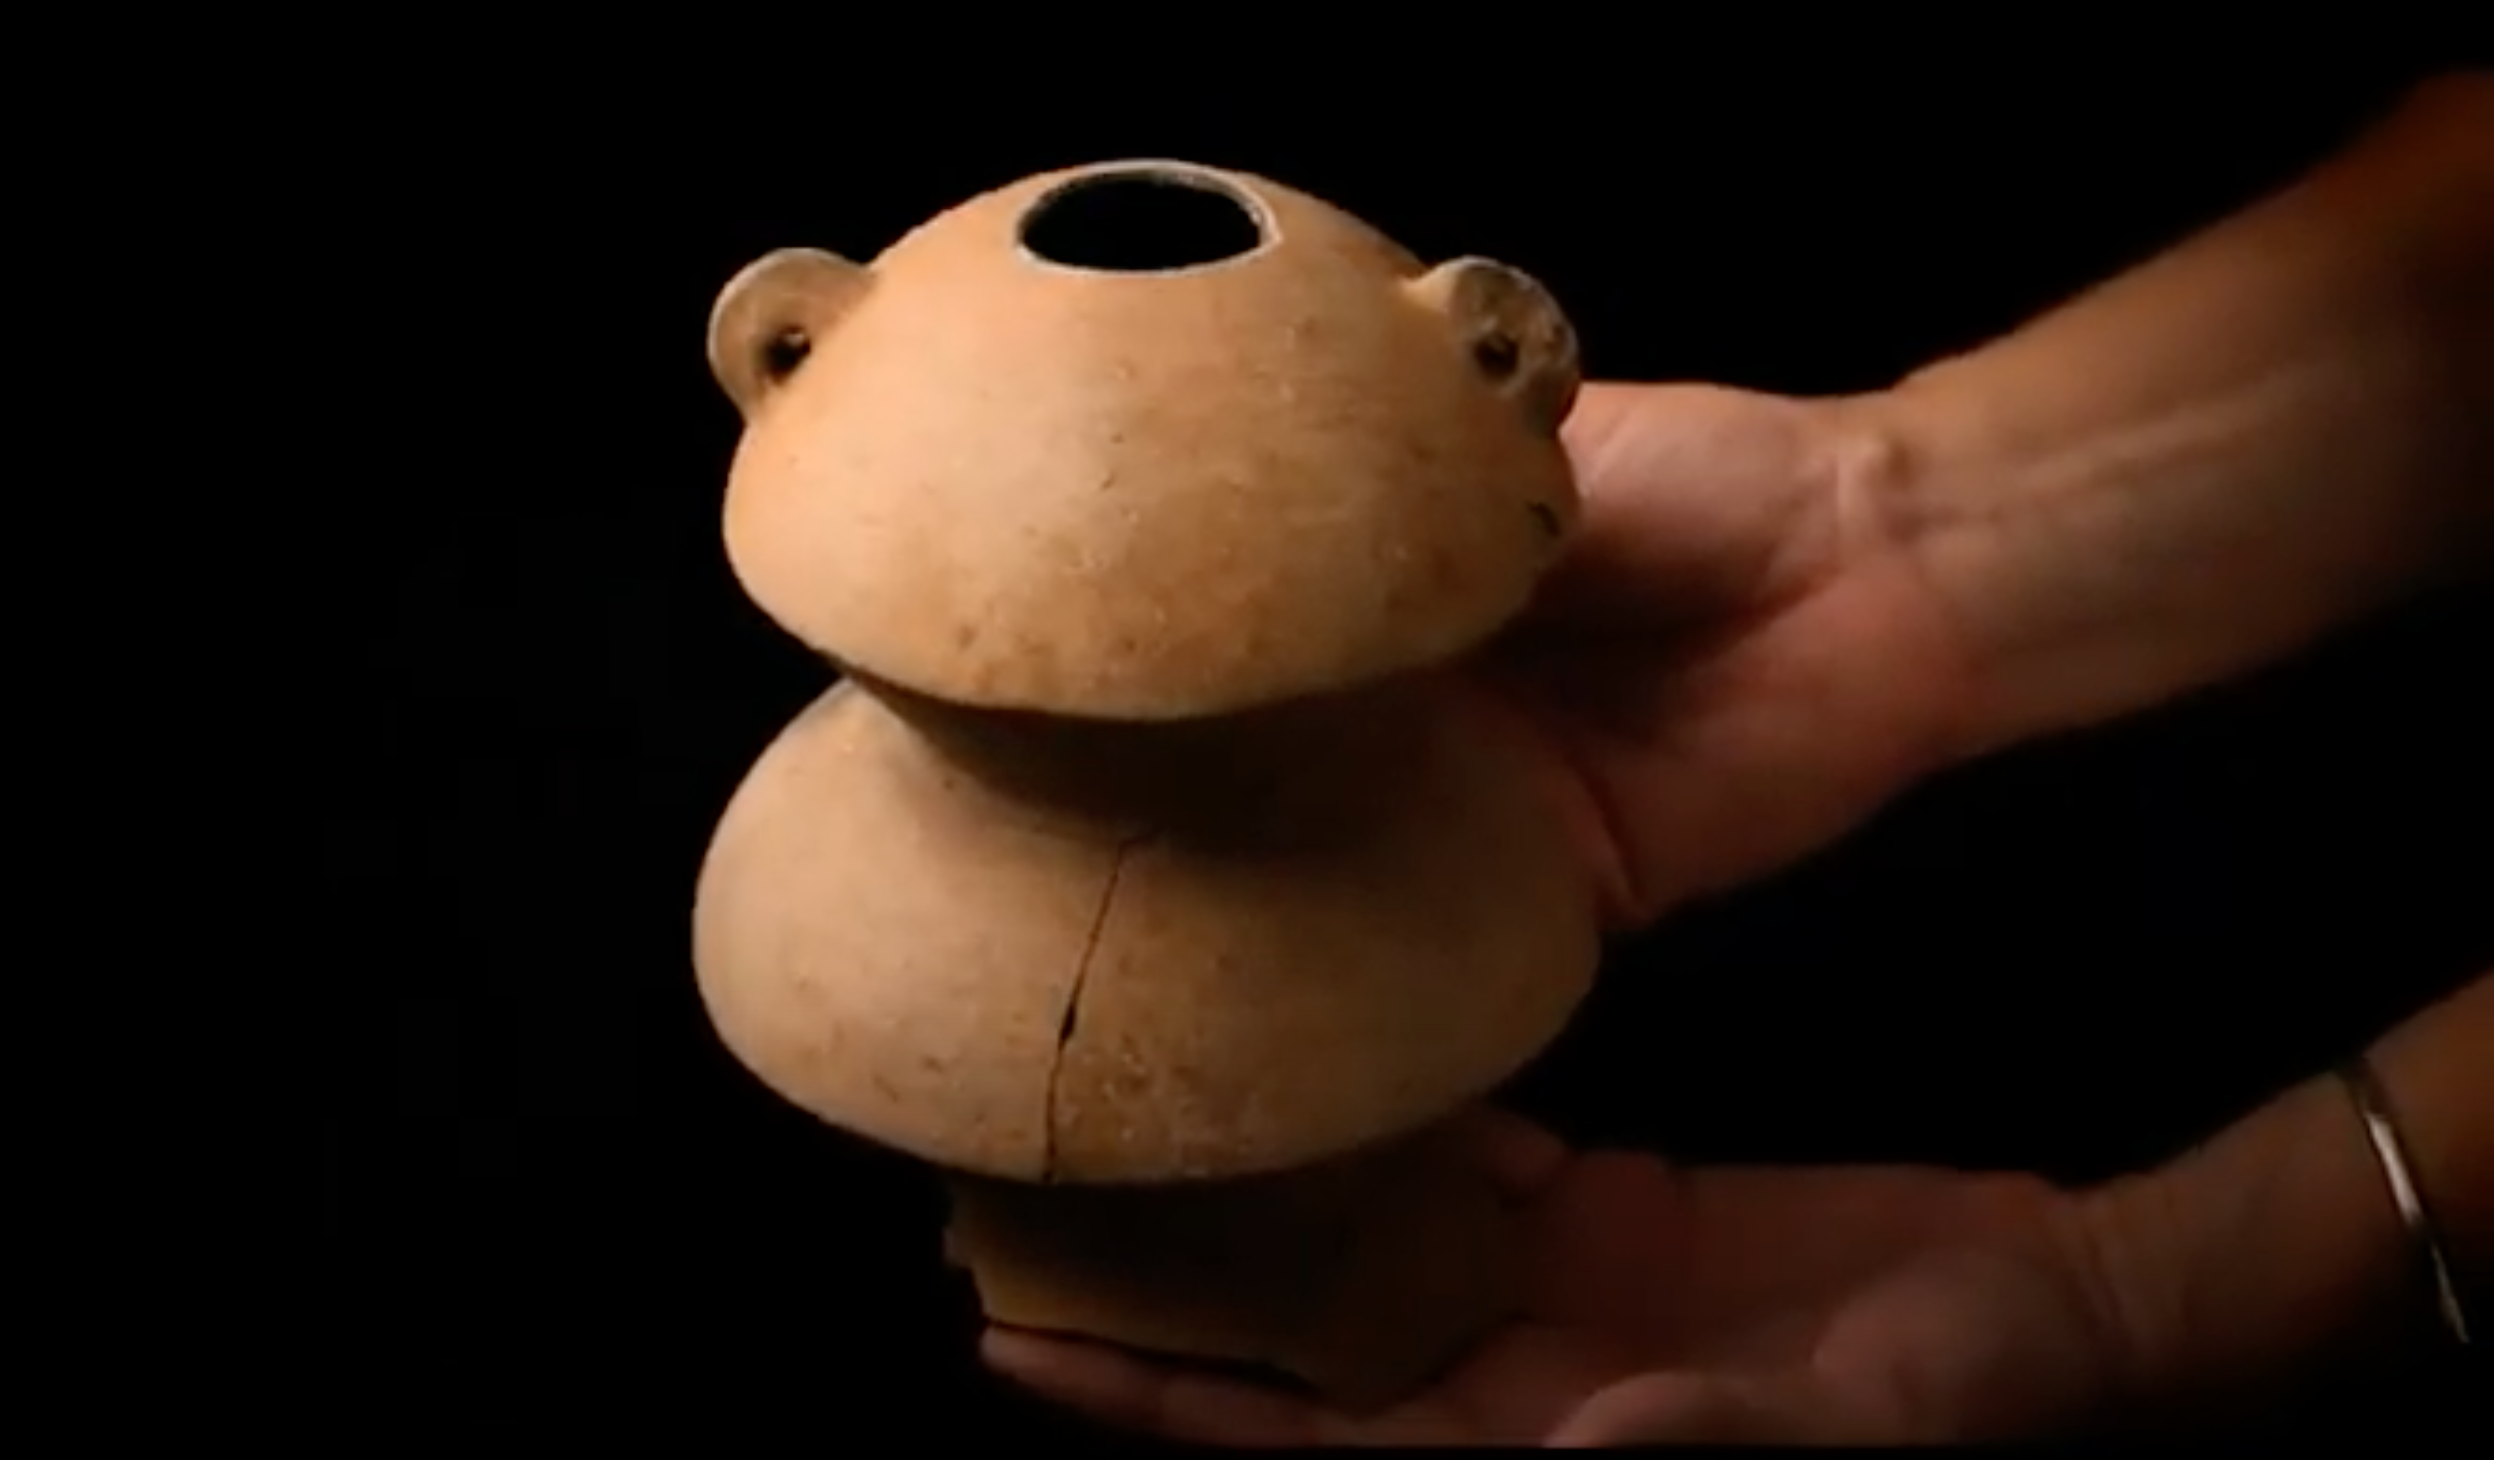 Archaeologists discovered this ancient ceramic vessel at Main Street. (Screenshot from the Charlotte Amalie Saladoid Excavation documentary)